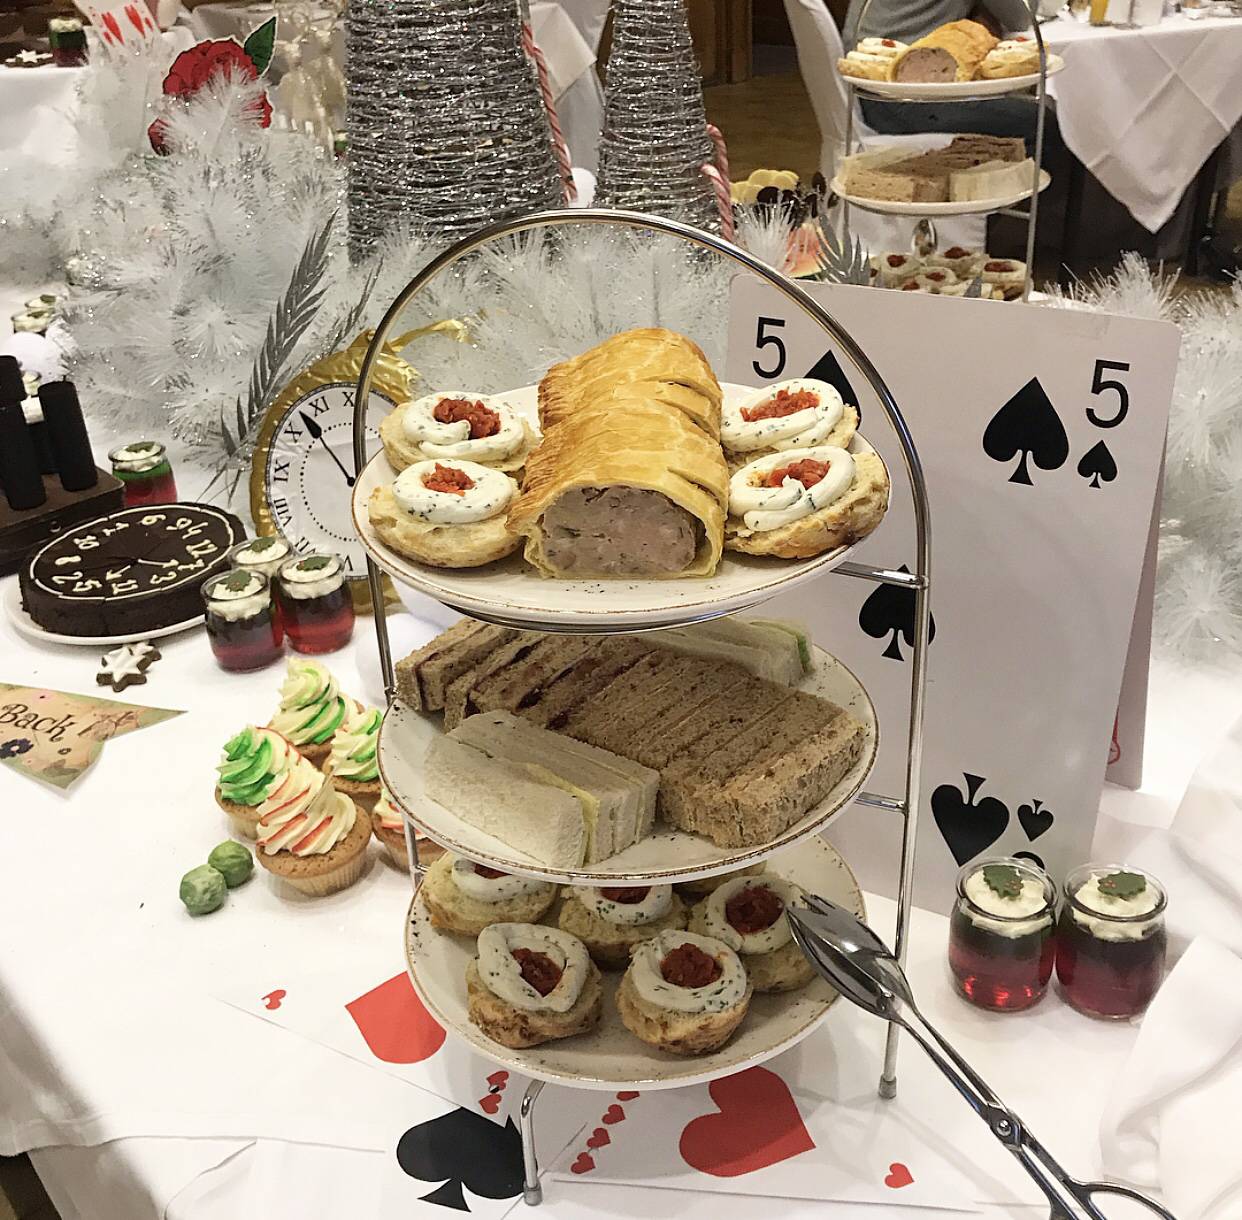 Alice's Winter Wonderland Tea Party at The Grand